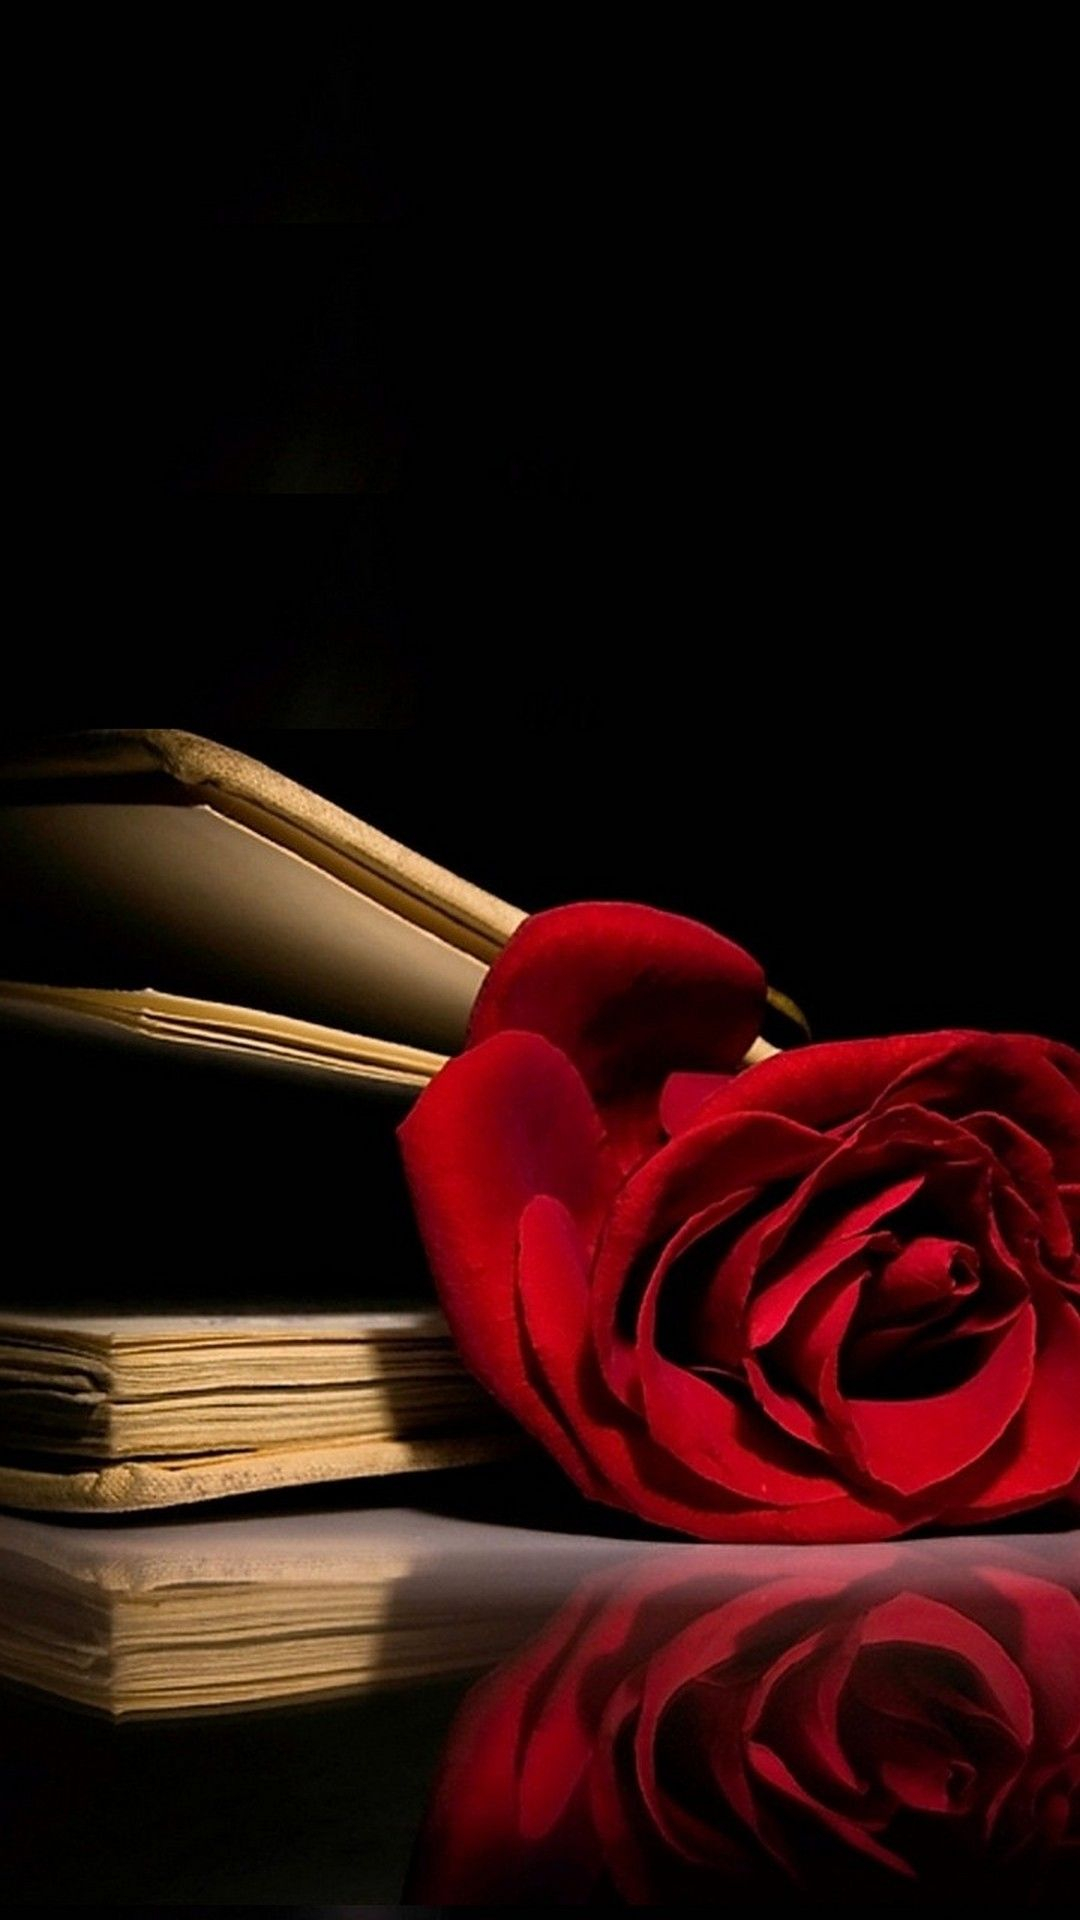 1080x1920 Red Rose Wallpaper iPhone | Best HD Wallpapers | Red roses wallpaper, Rose wallpaper, Wallpaper iphone roses